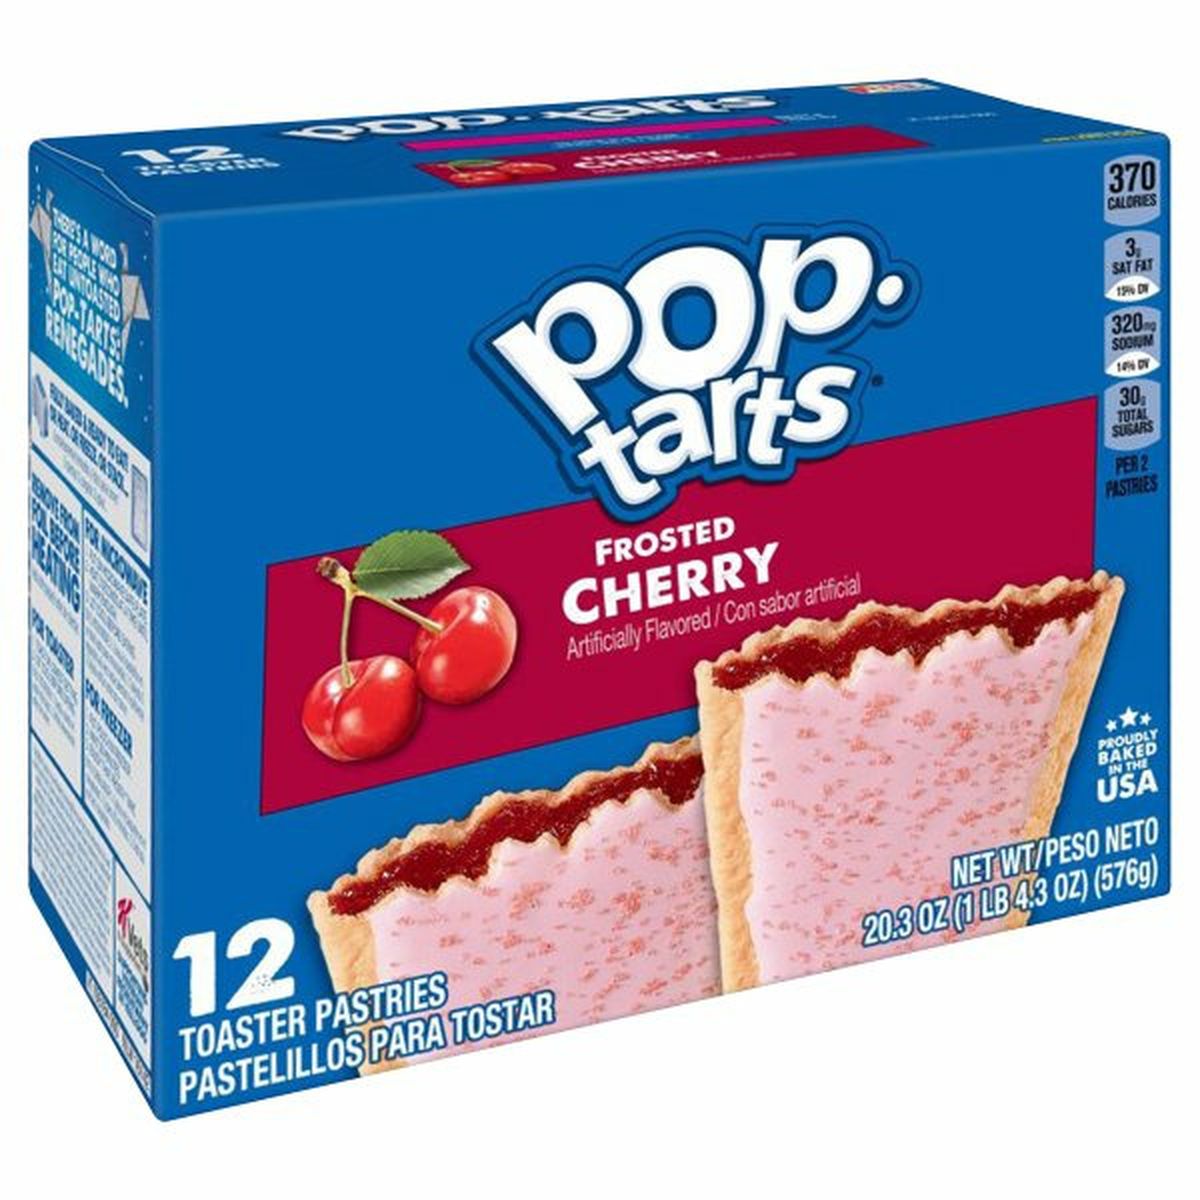 Calories in Kellogg's Pop-Tarts Toaster Pastries Breakfast Toaster Pastries, Frosted Cherry, Proudly Baked in the USA